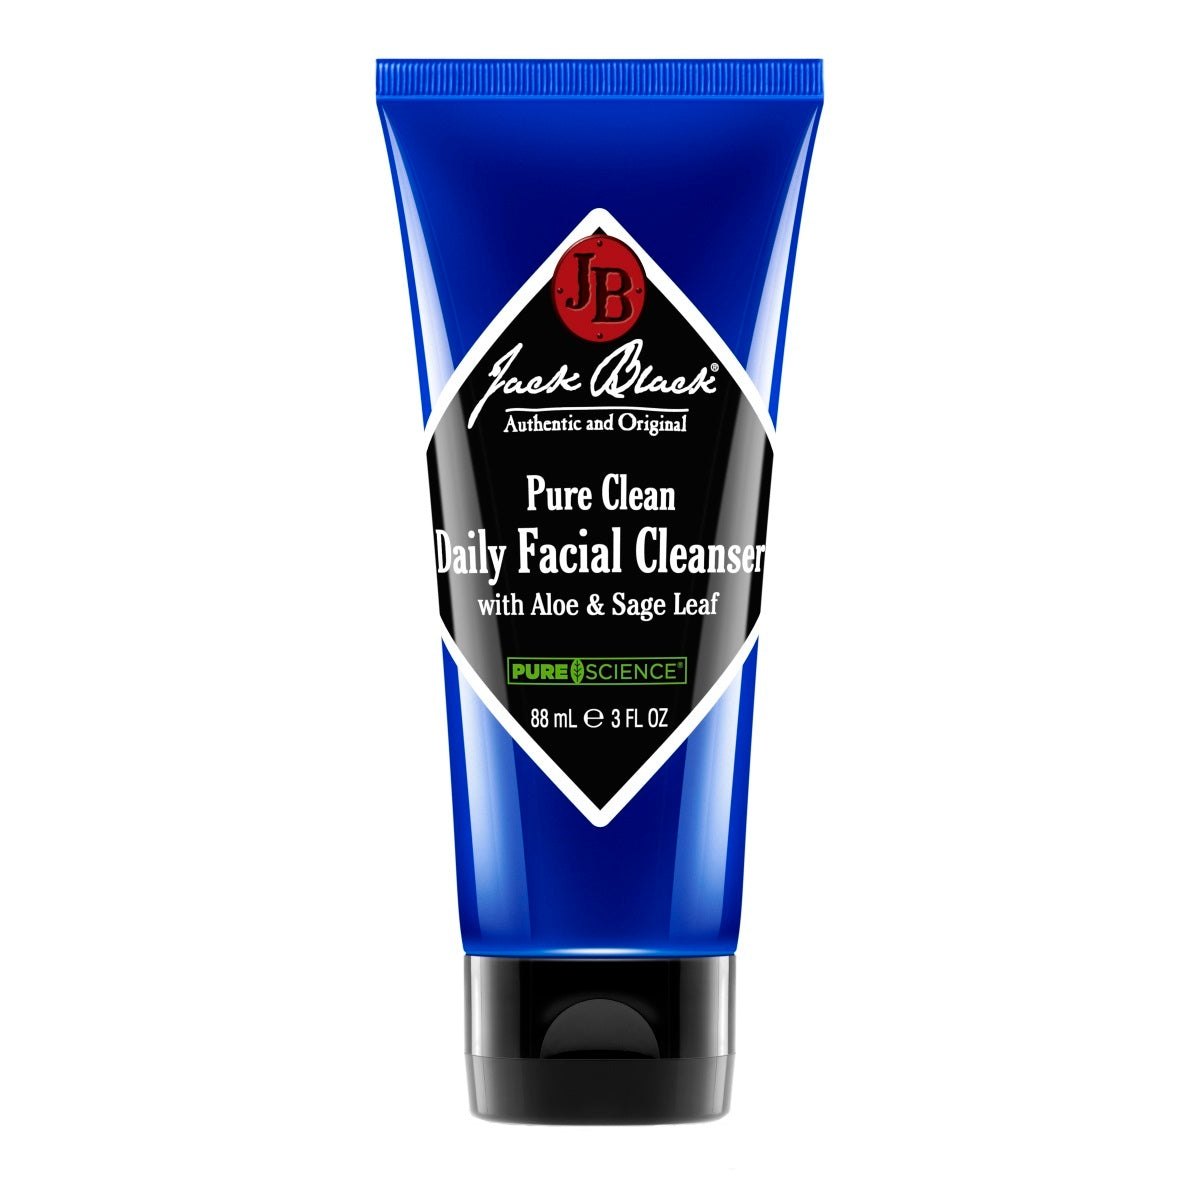 Primary image of Pure Clean Daily Facial Cleanser